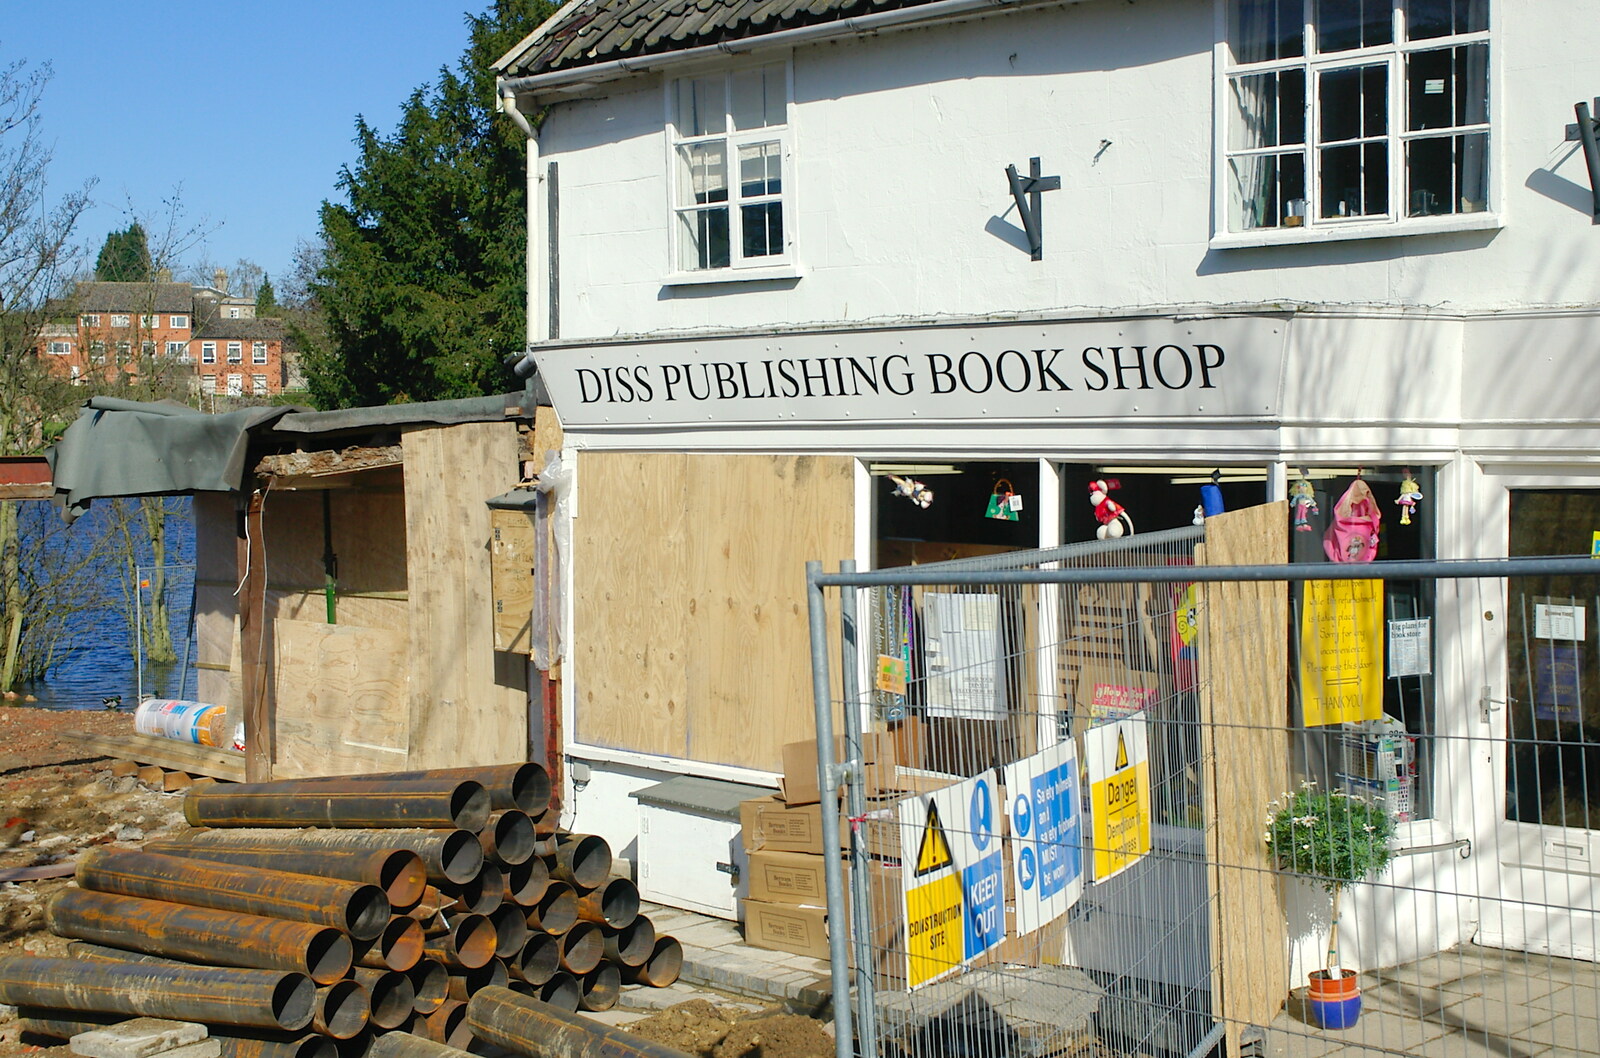 Diss Publishing Book Shop from Norwich Market, the BSCC at Occold, and Diss Publishing - 10th April 2005